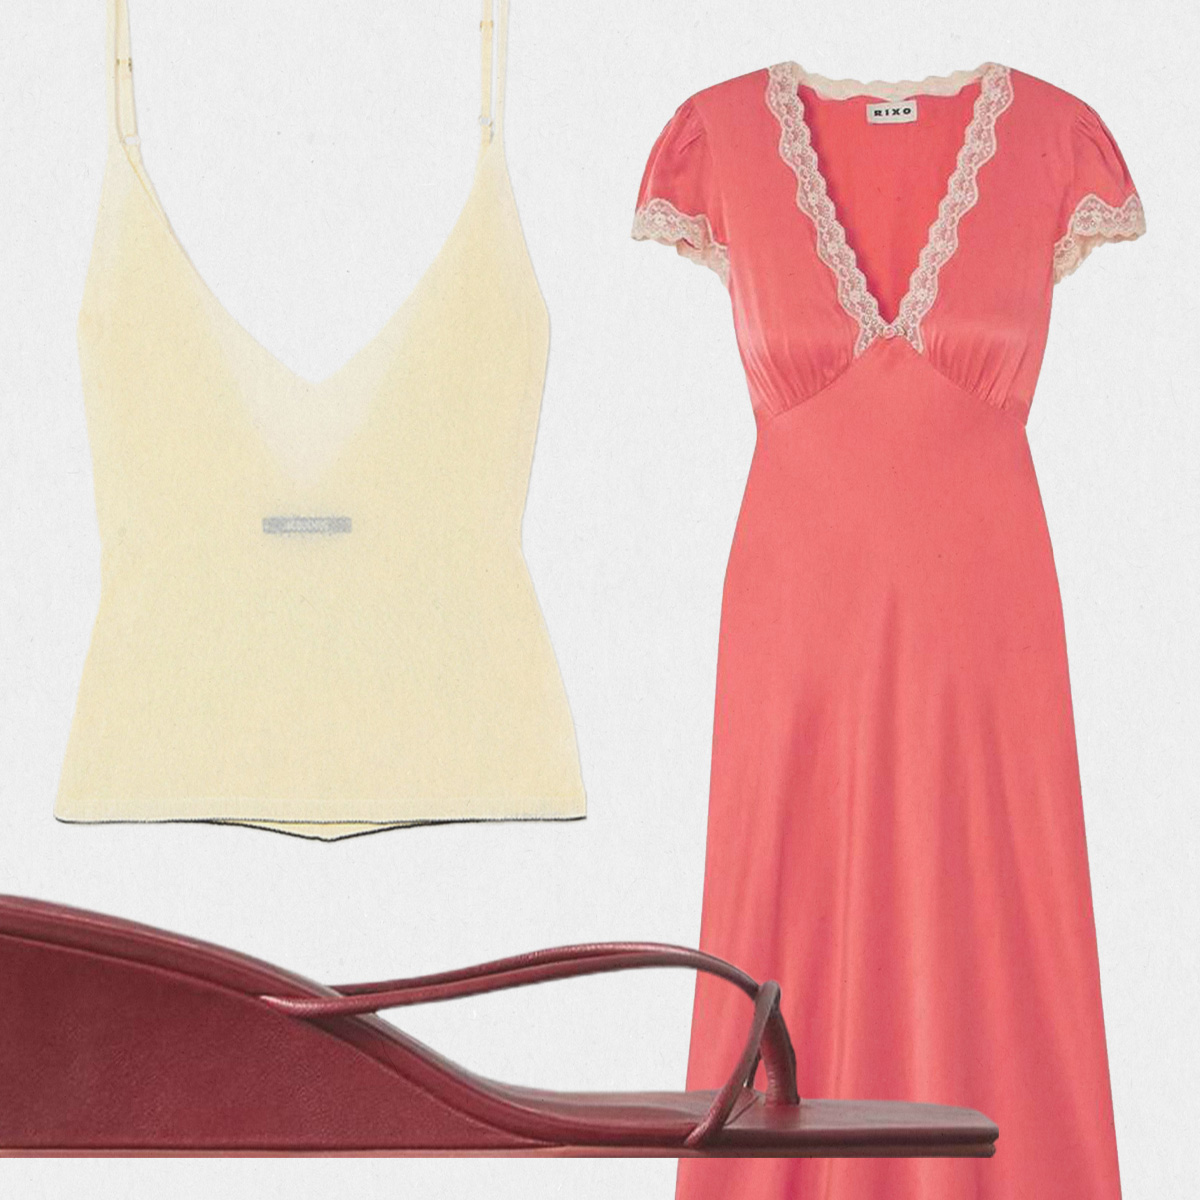 Summer Fashion Is Elite—These 18 Dresses, Tops, and Sandals Prove My Theory